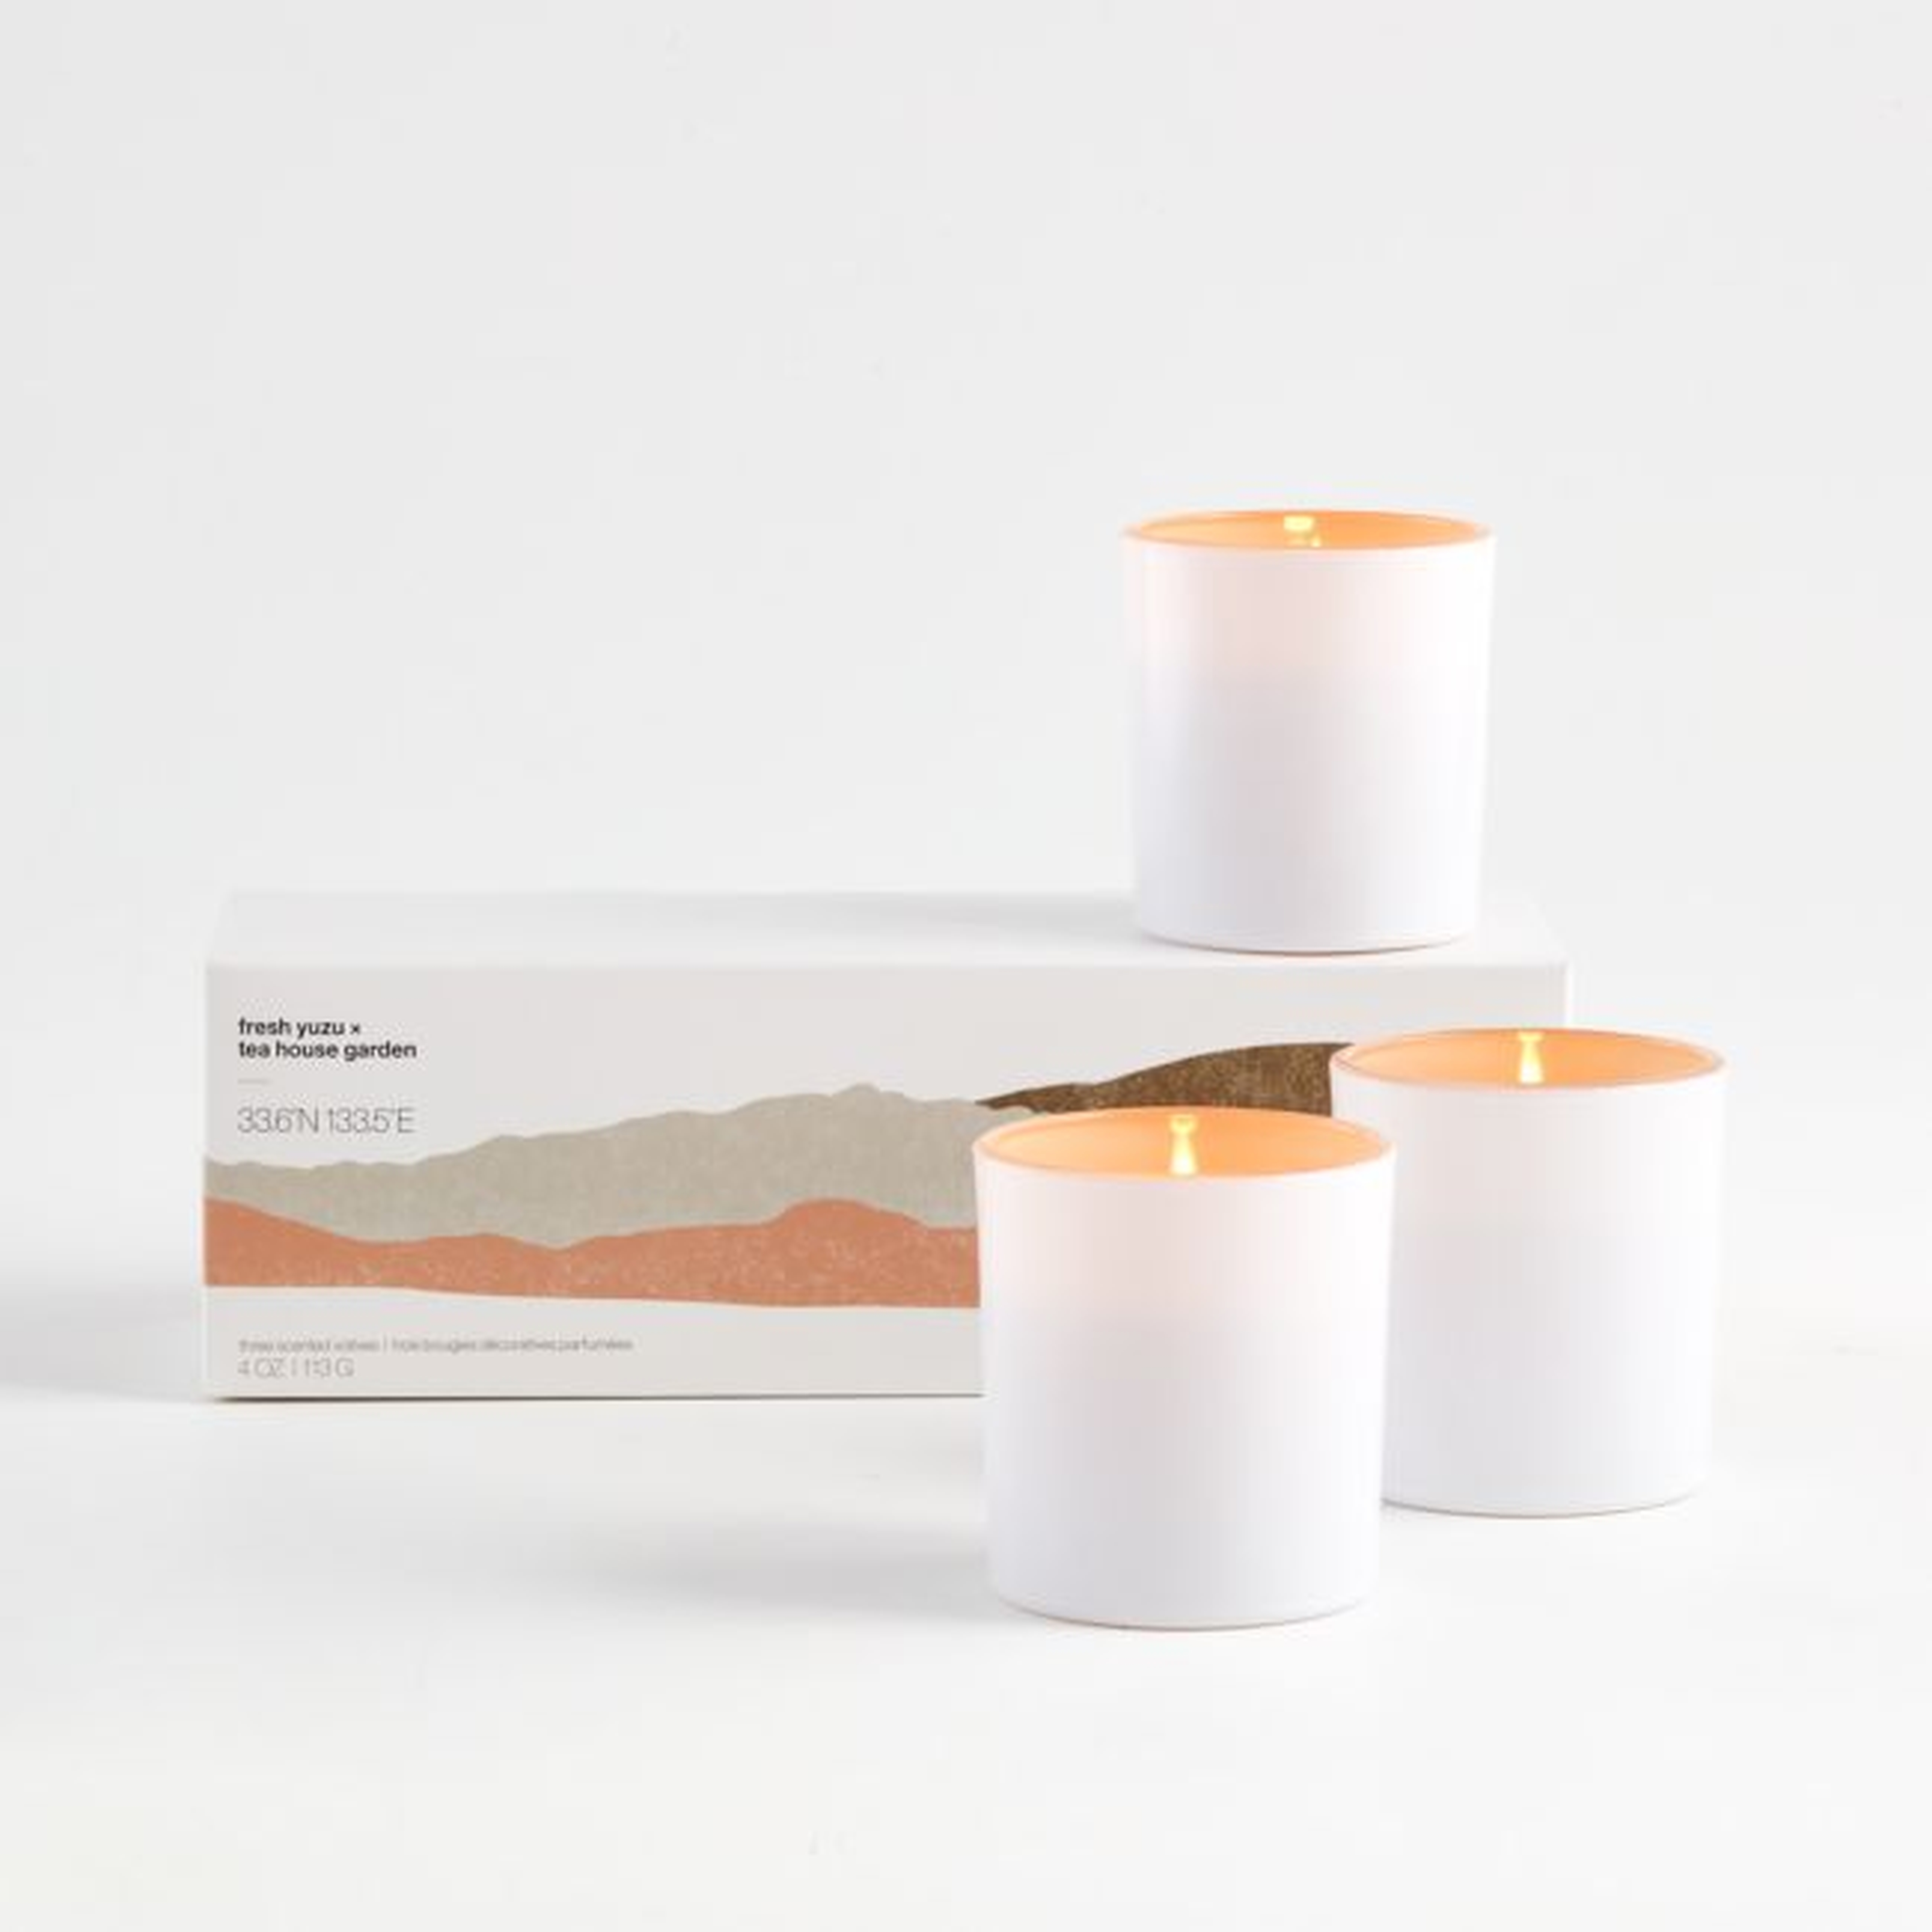 Fresh Yuzu and Teahouse Garden Scented Votive Candles, Set of 3 - Crate and Barrel